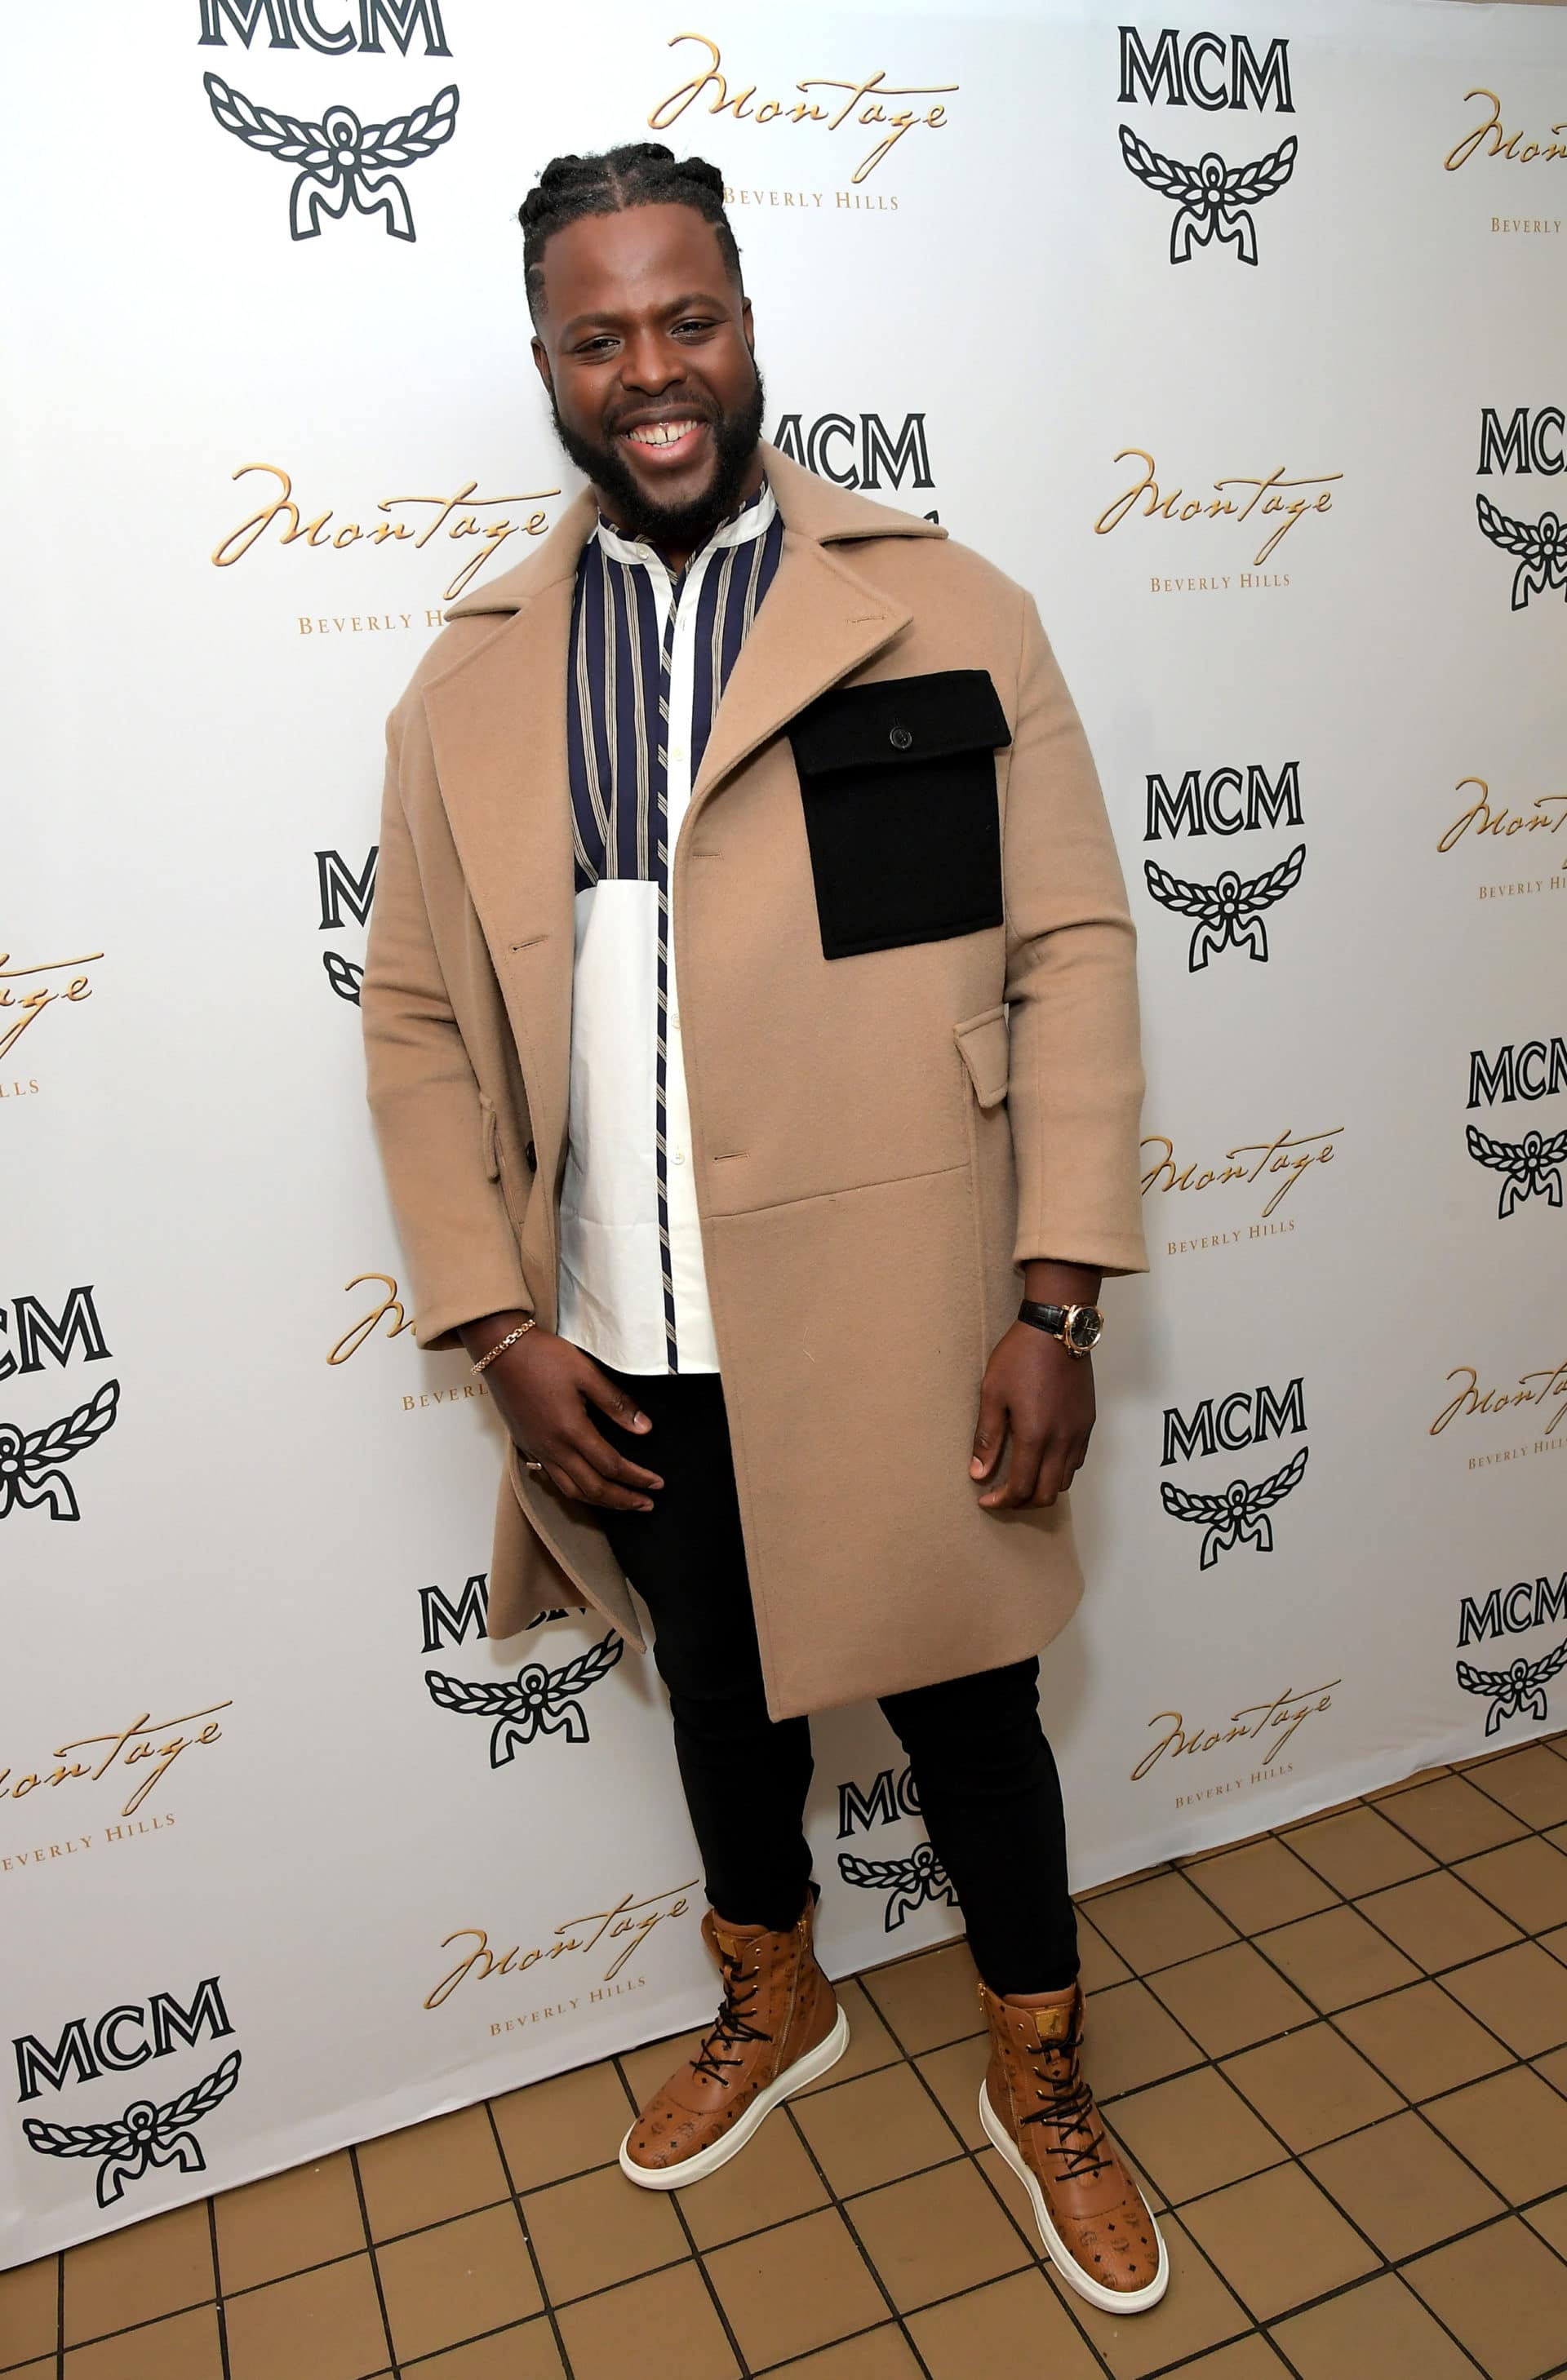 Winston Duke, Trevante Rhodes, Vivica A. Fox, And More Celebs Out And About